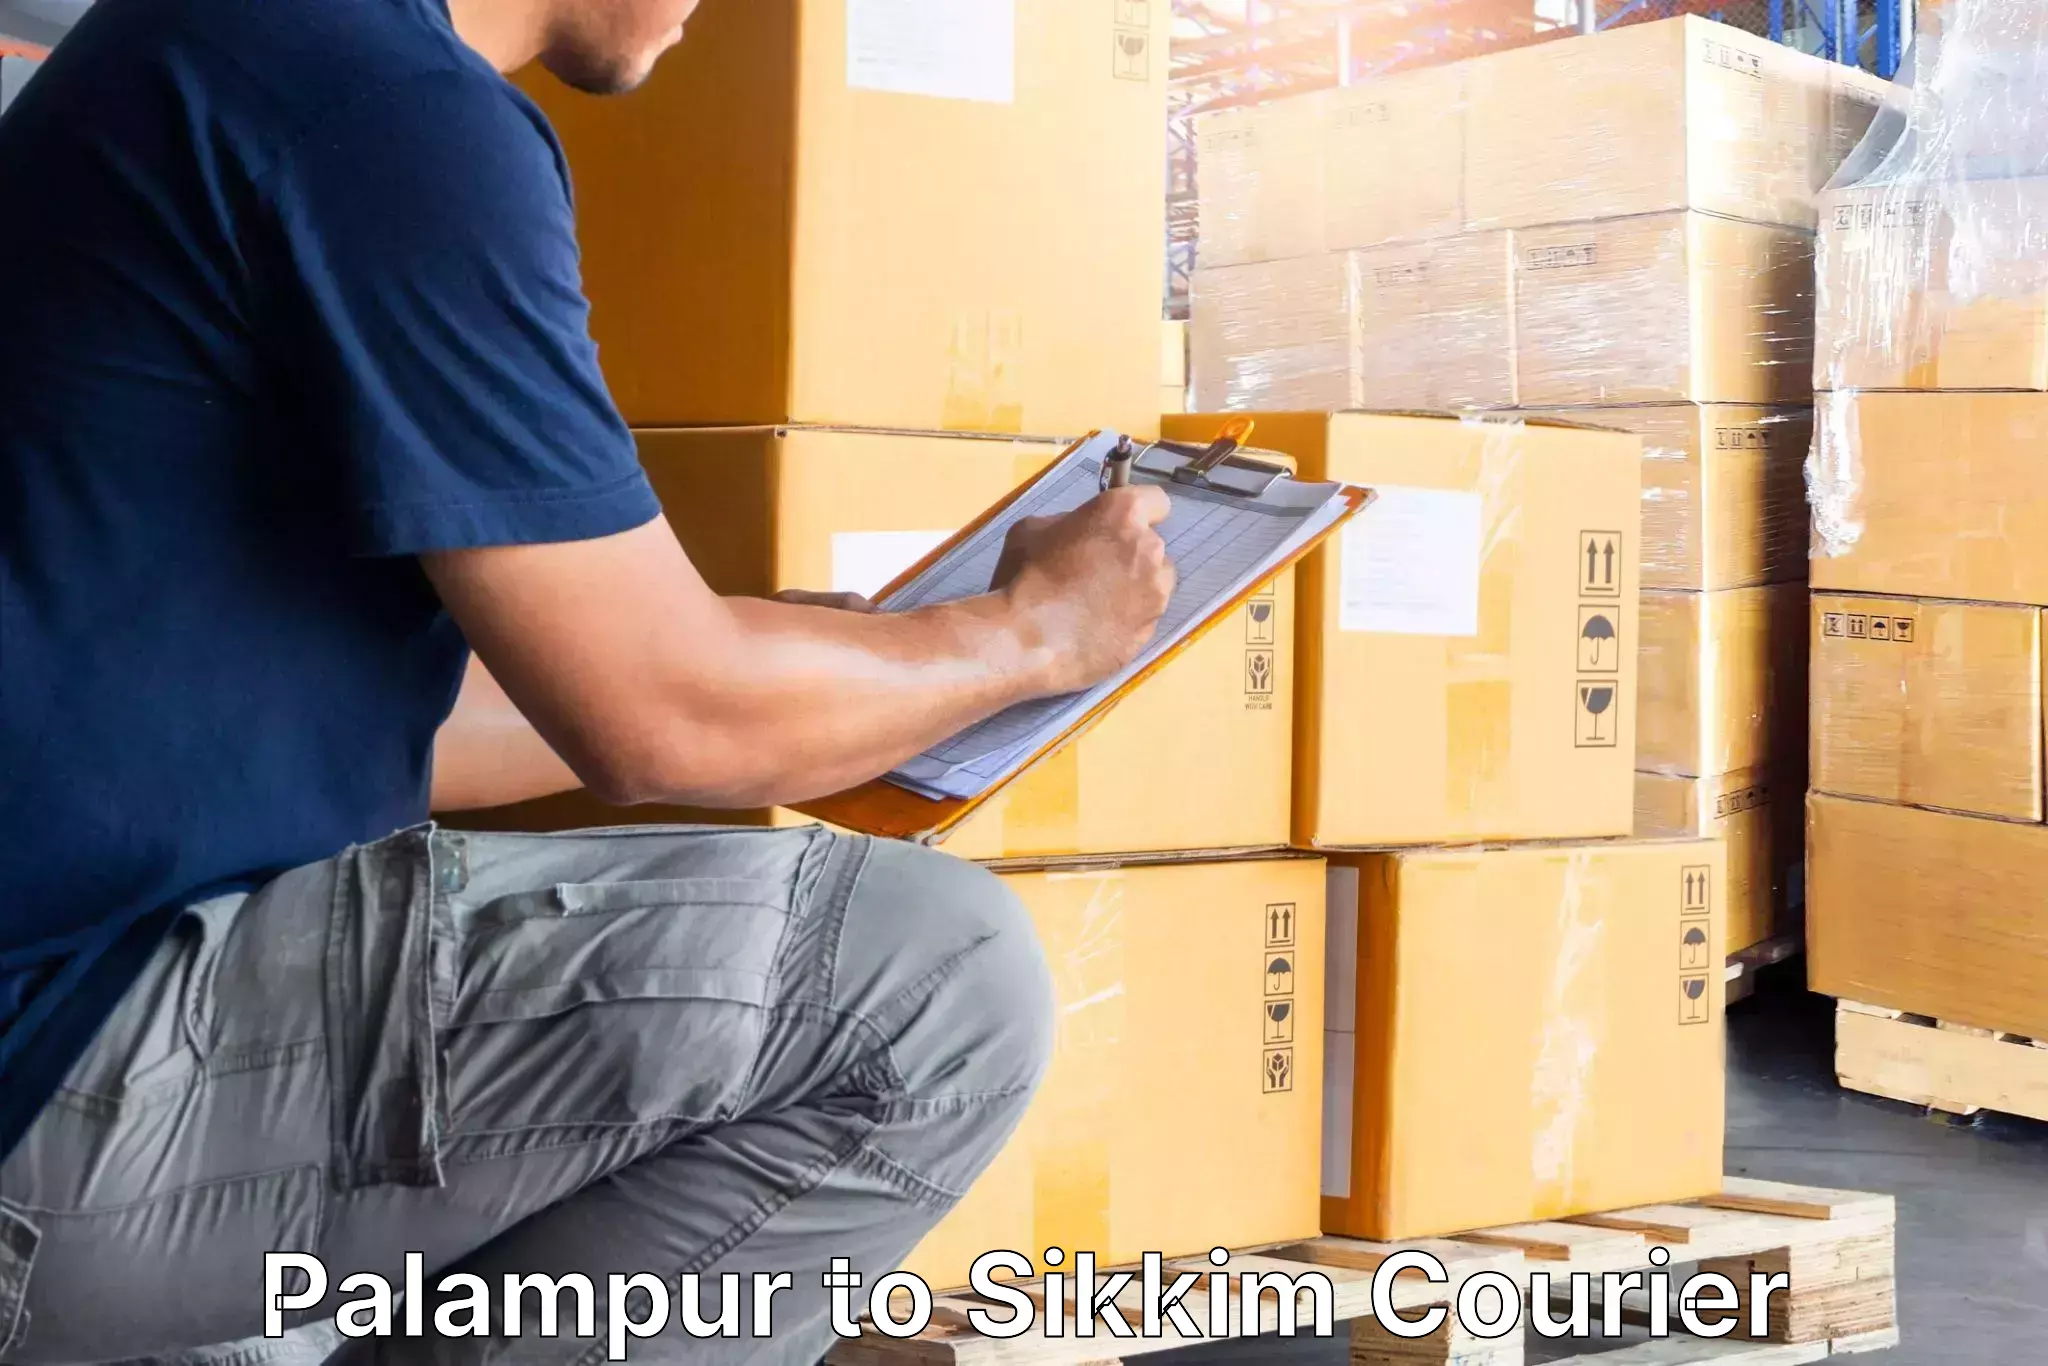 Quality relocation services Palampur to Pelling